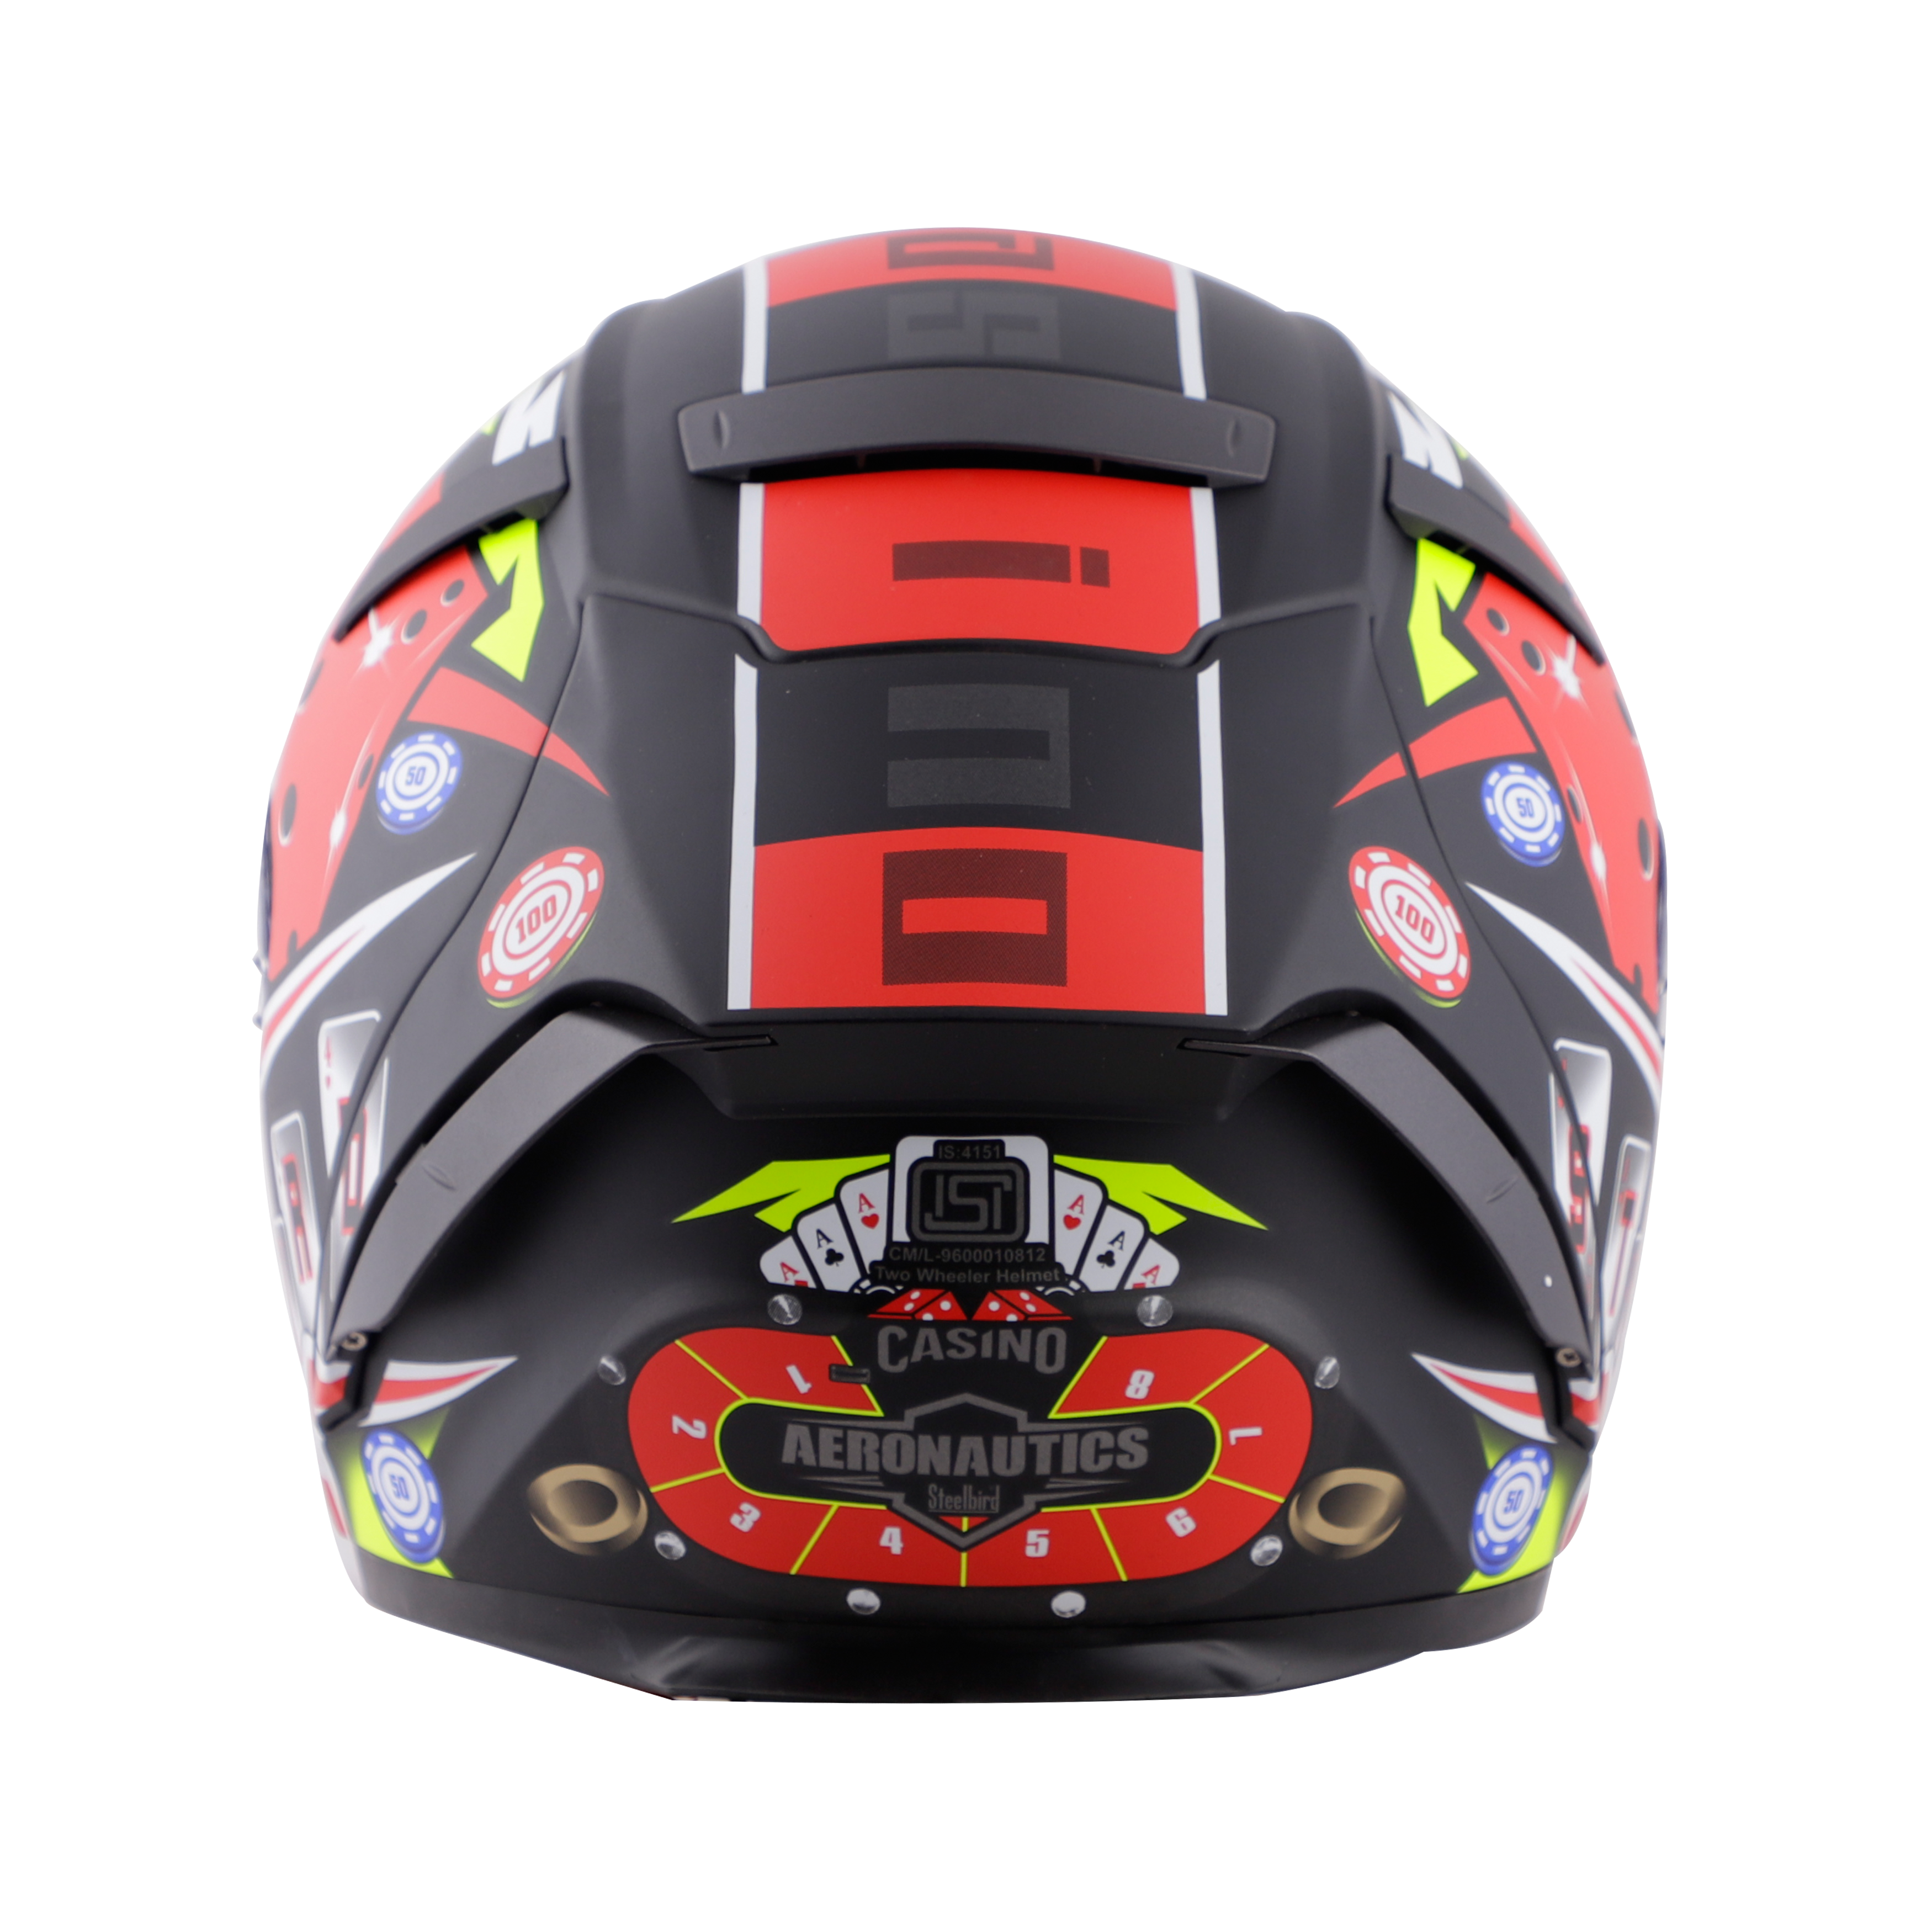 SA-2 CASINO MAT BLACK WITH RED ( FITTED WITH CLEAR VISOR EXTRA RAINBOW CHROME VISOR FREE WITH ANTI-FOG SHIELD HOLDER)